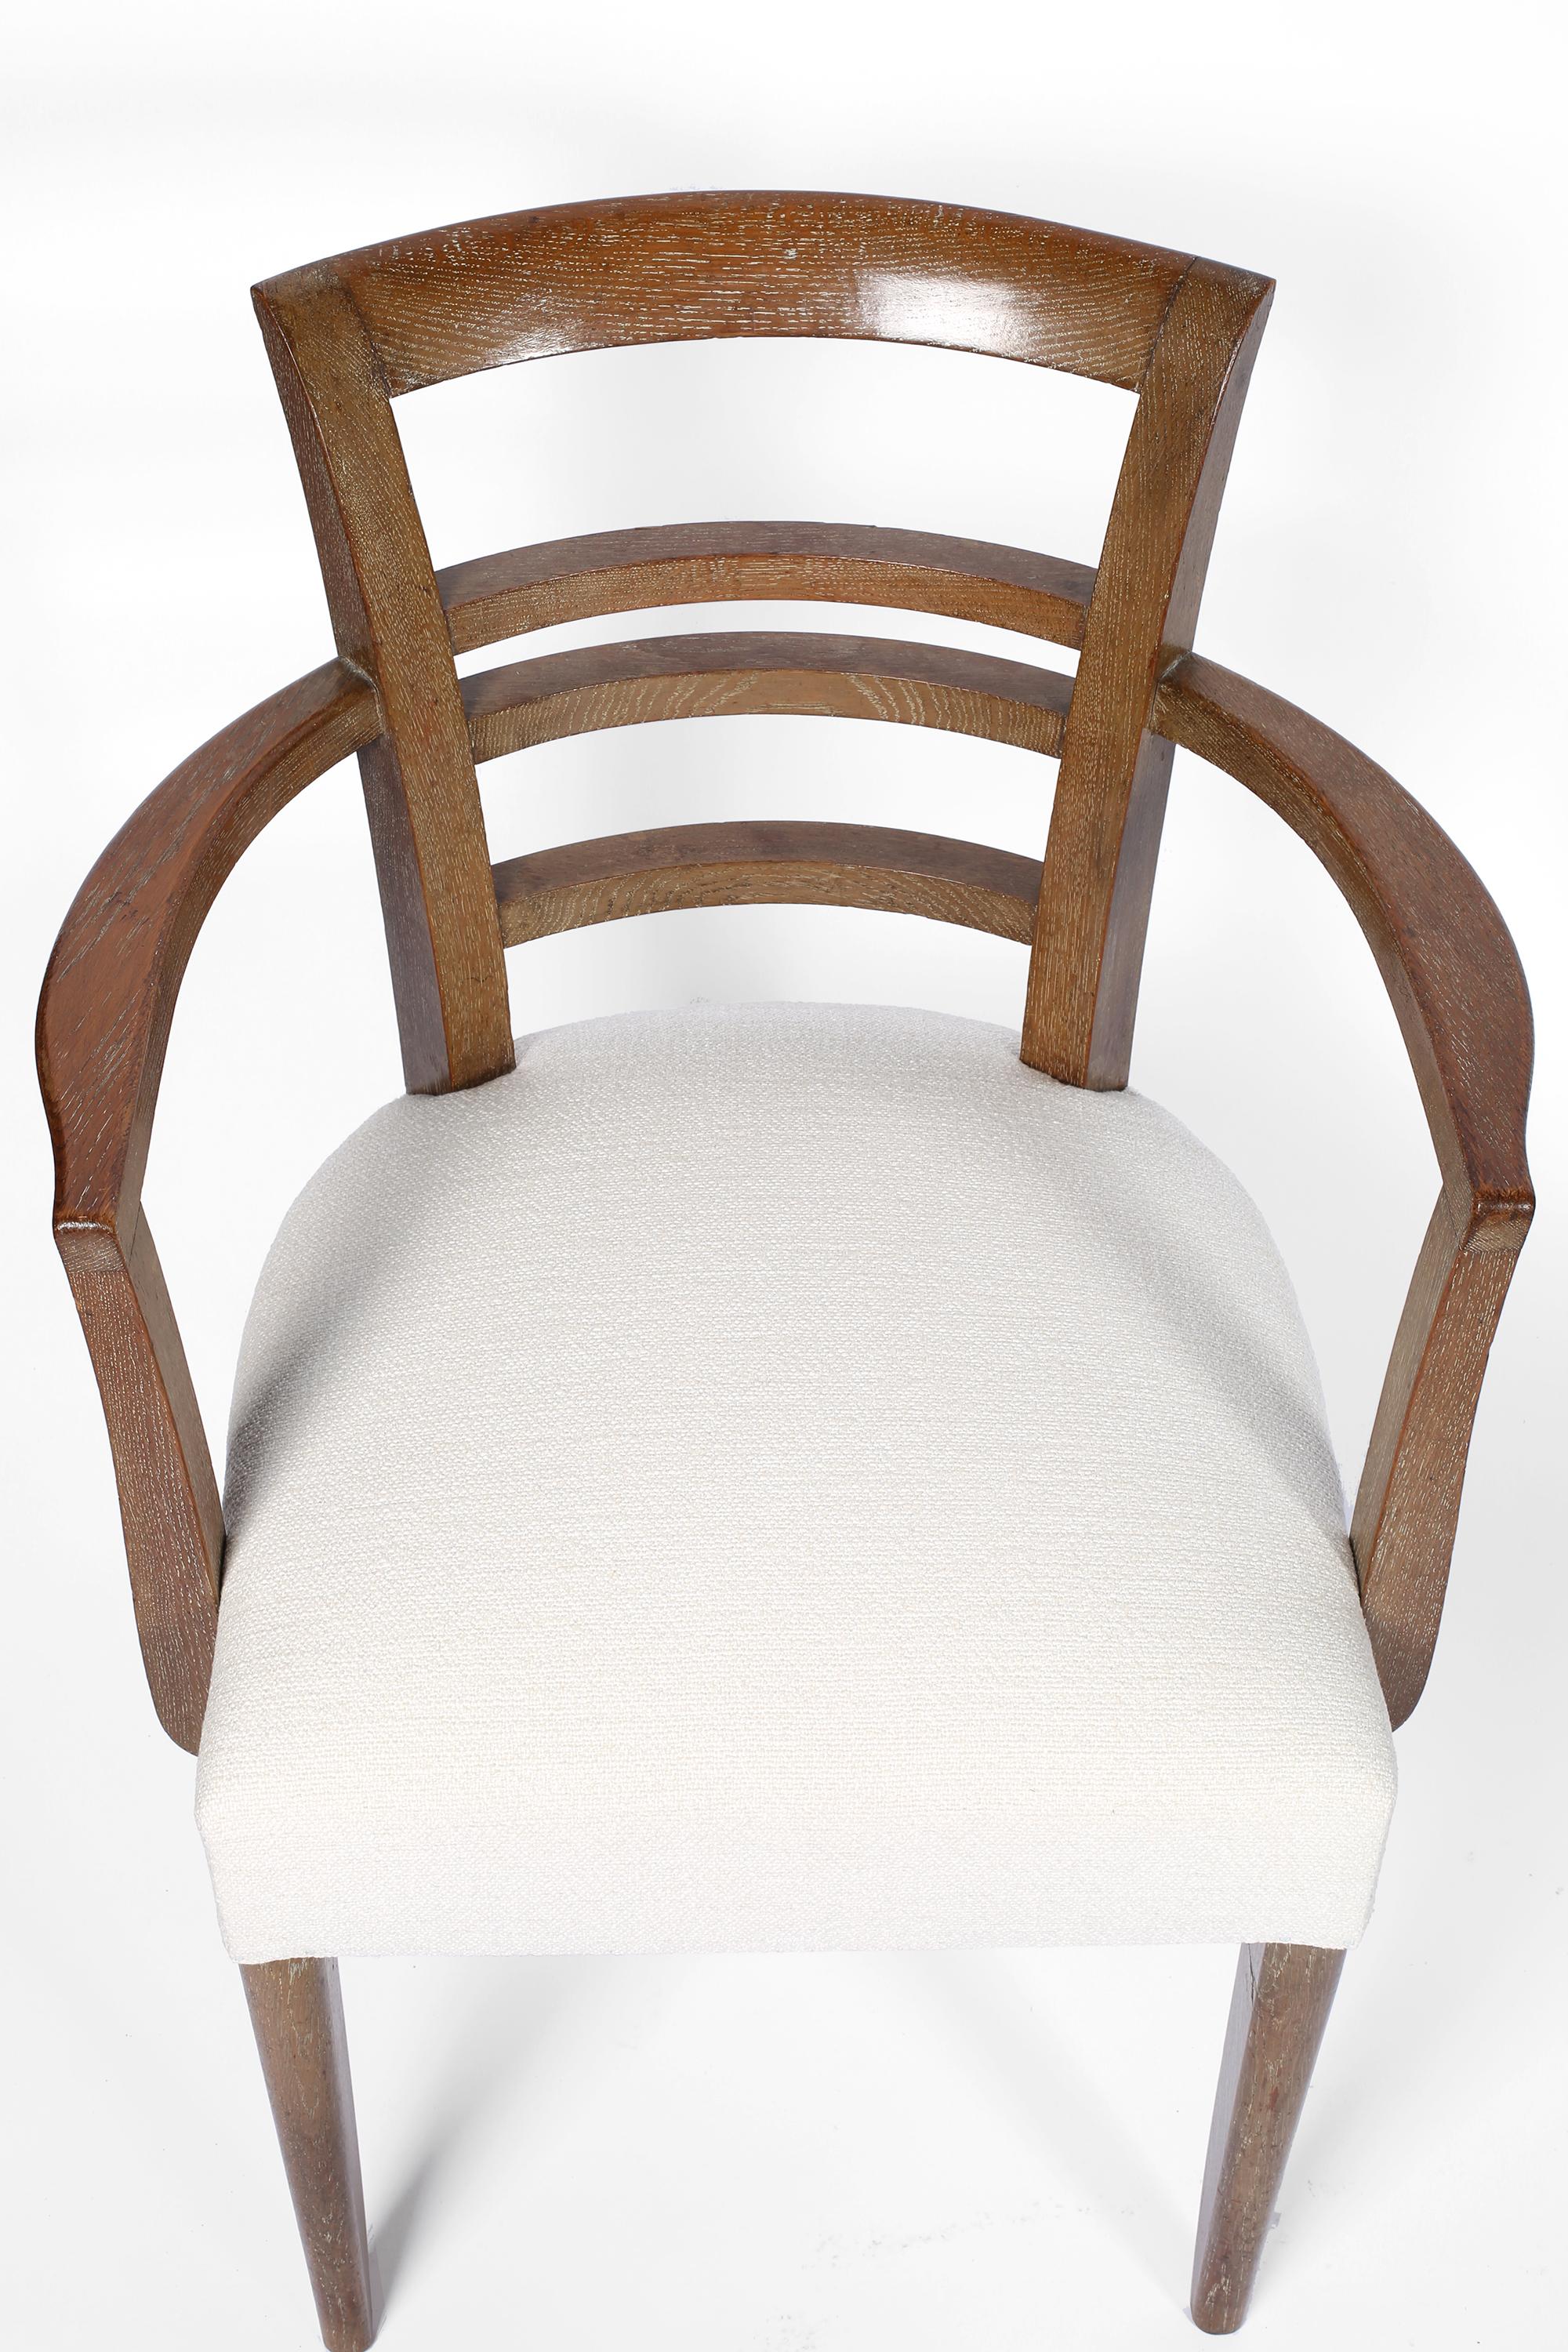 French Art Deco Limed Oak Occasional Chairs 1940s Cerused For Sale 4